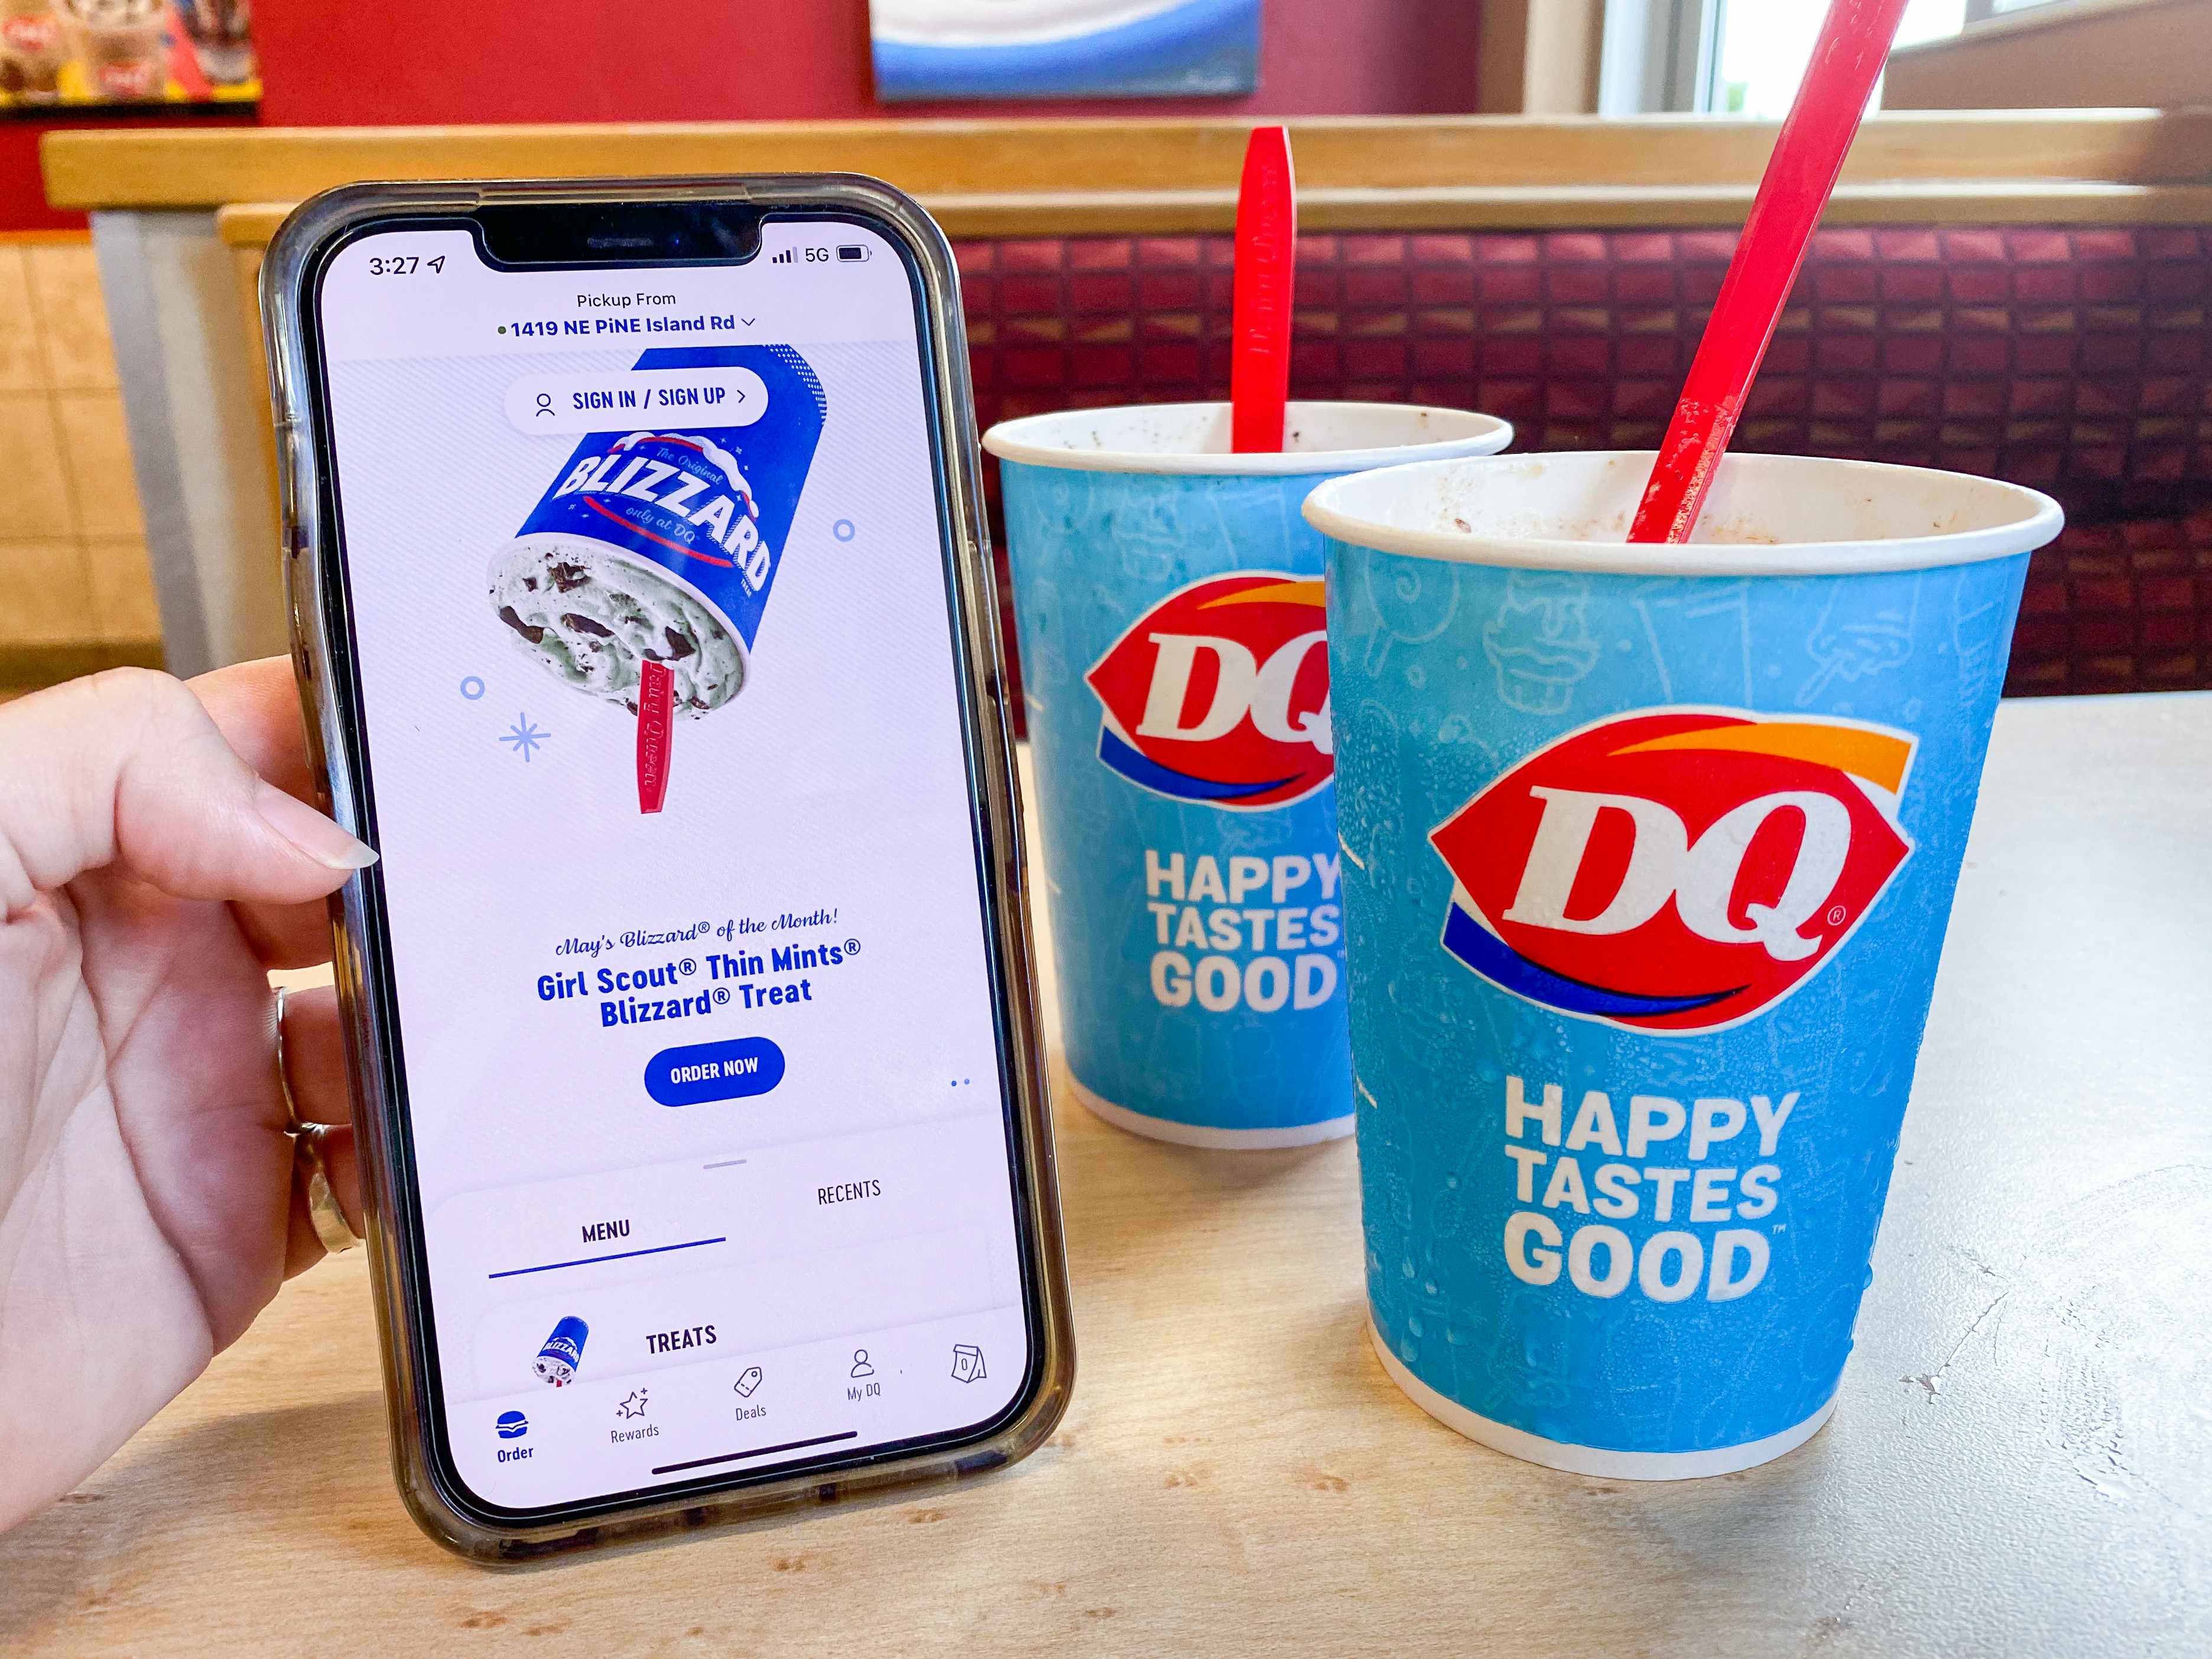 A person's hand holding a cell phone displaying the Dairy Queen app next to two Blizzard cups sitting on a table at Dairy Queen. Blizzards are some of the free fast food options available.